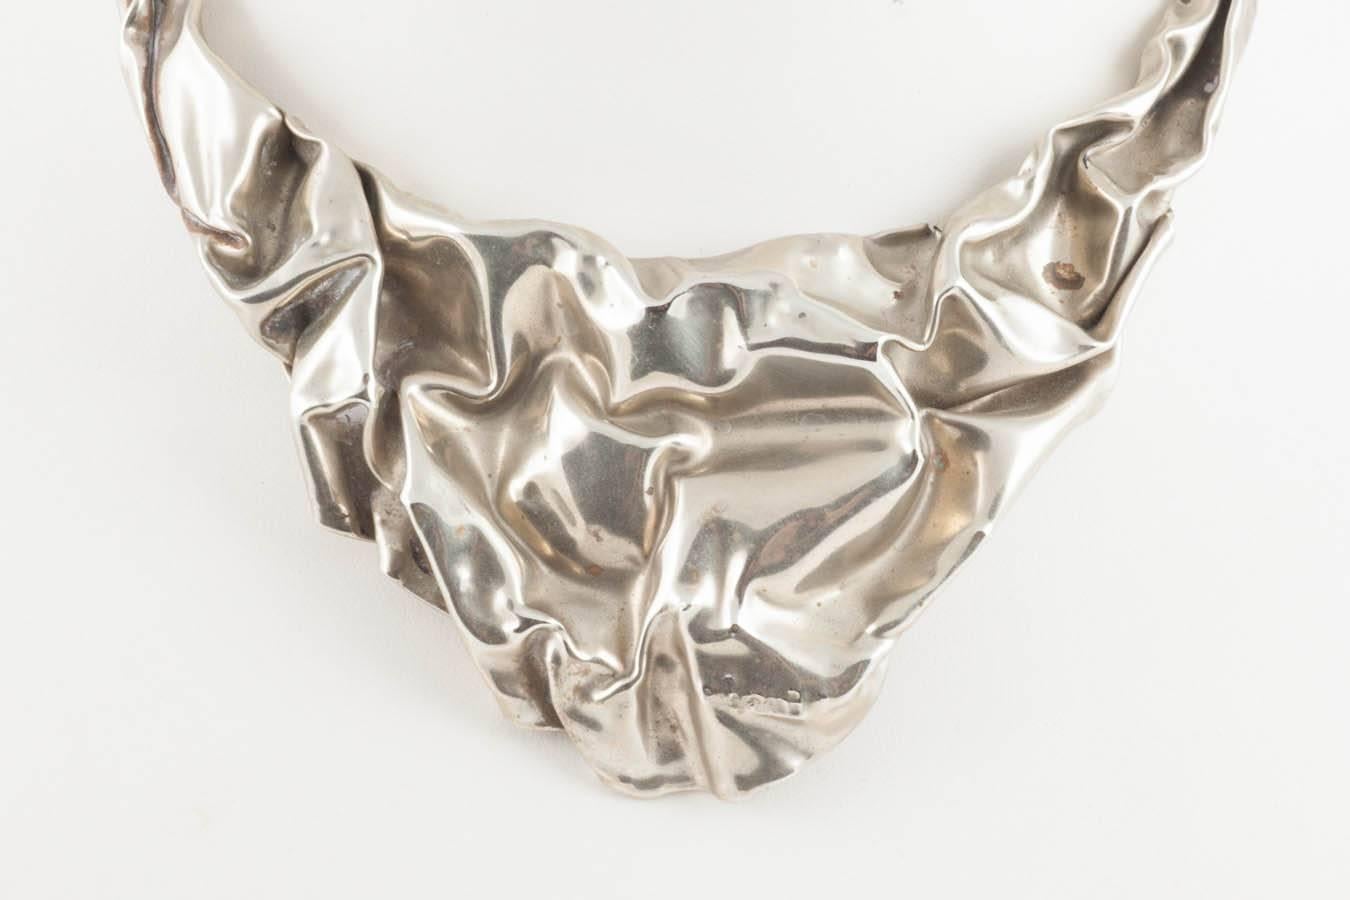 Wonderful designer maker 'crumpled paper' style silver tone metal necklace. It looks so modern and intriguing. It is also very light which makes it very easy to wear. Sadly the signature is completely illegible. Nevertheless, a great modernist